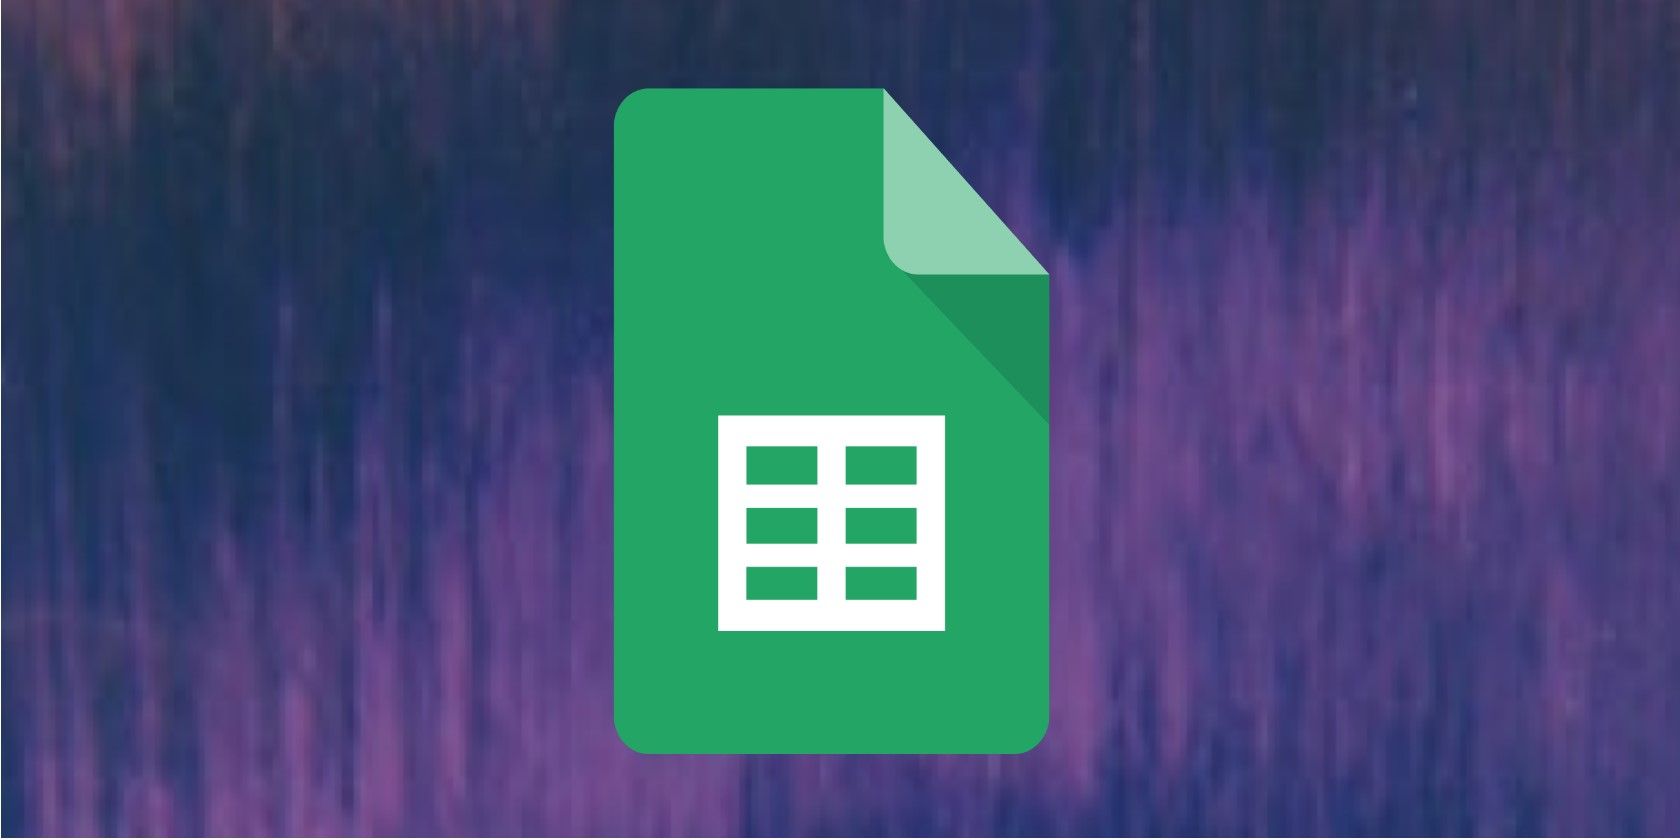 The Google Sheets logo on a purple background